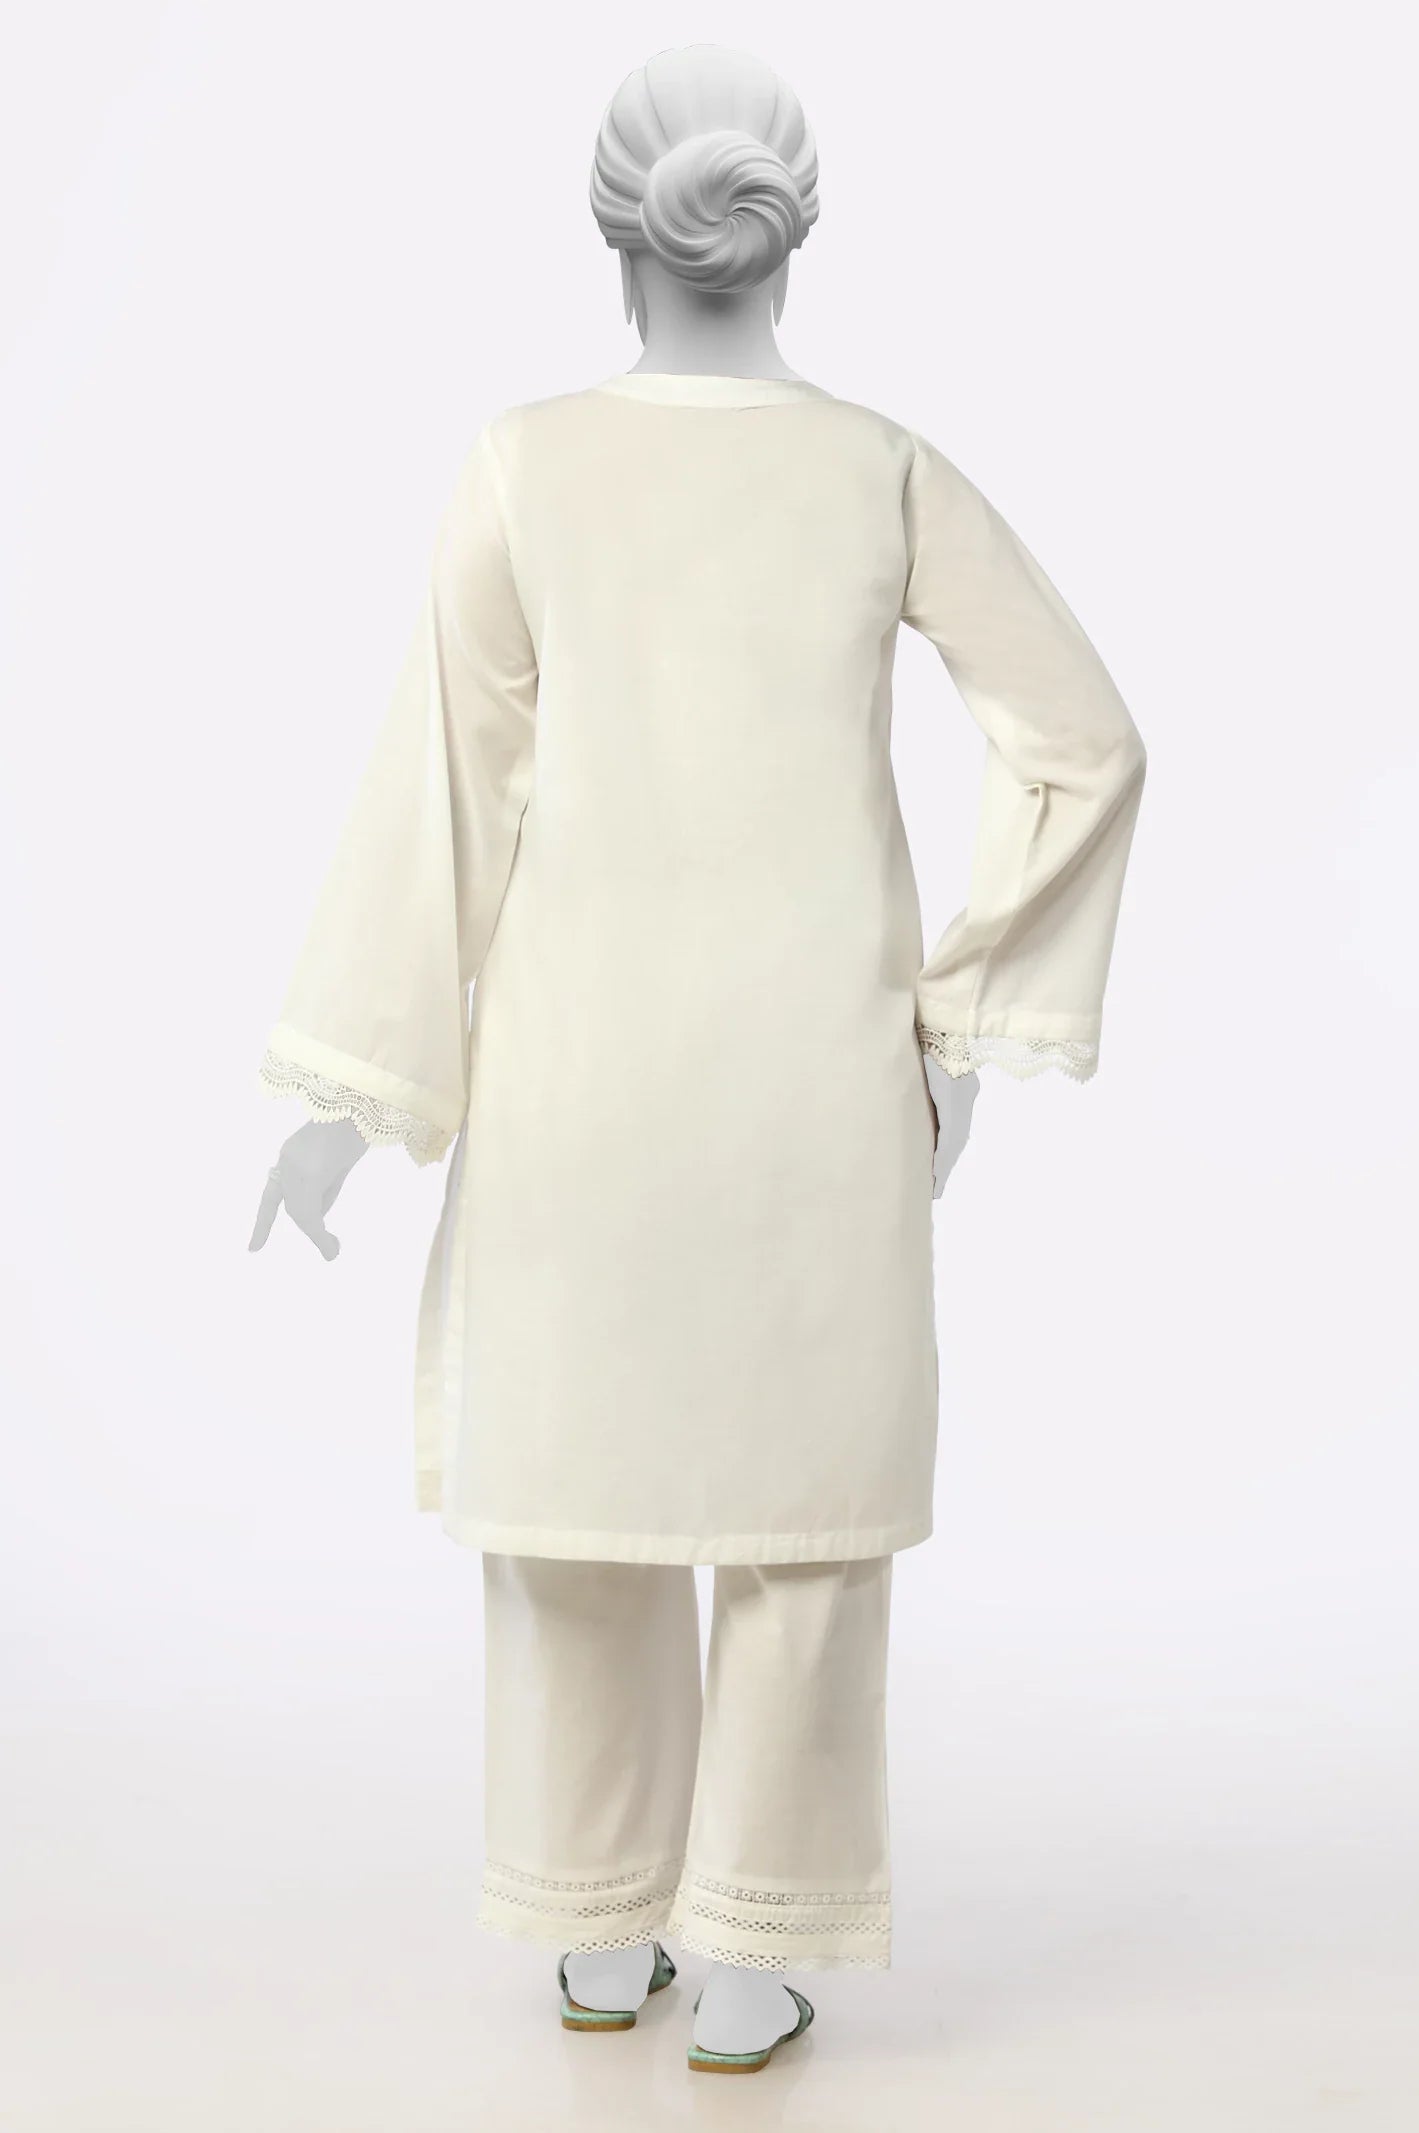 White Embroidered Kurti From Sohaye By Diners